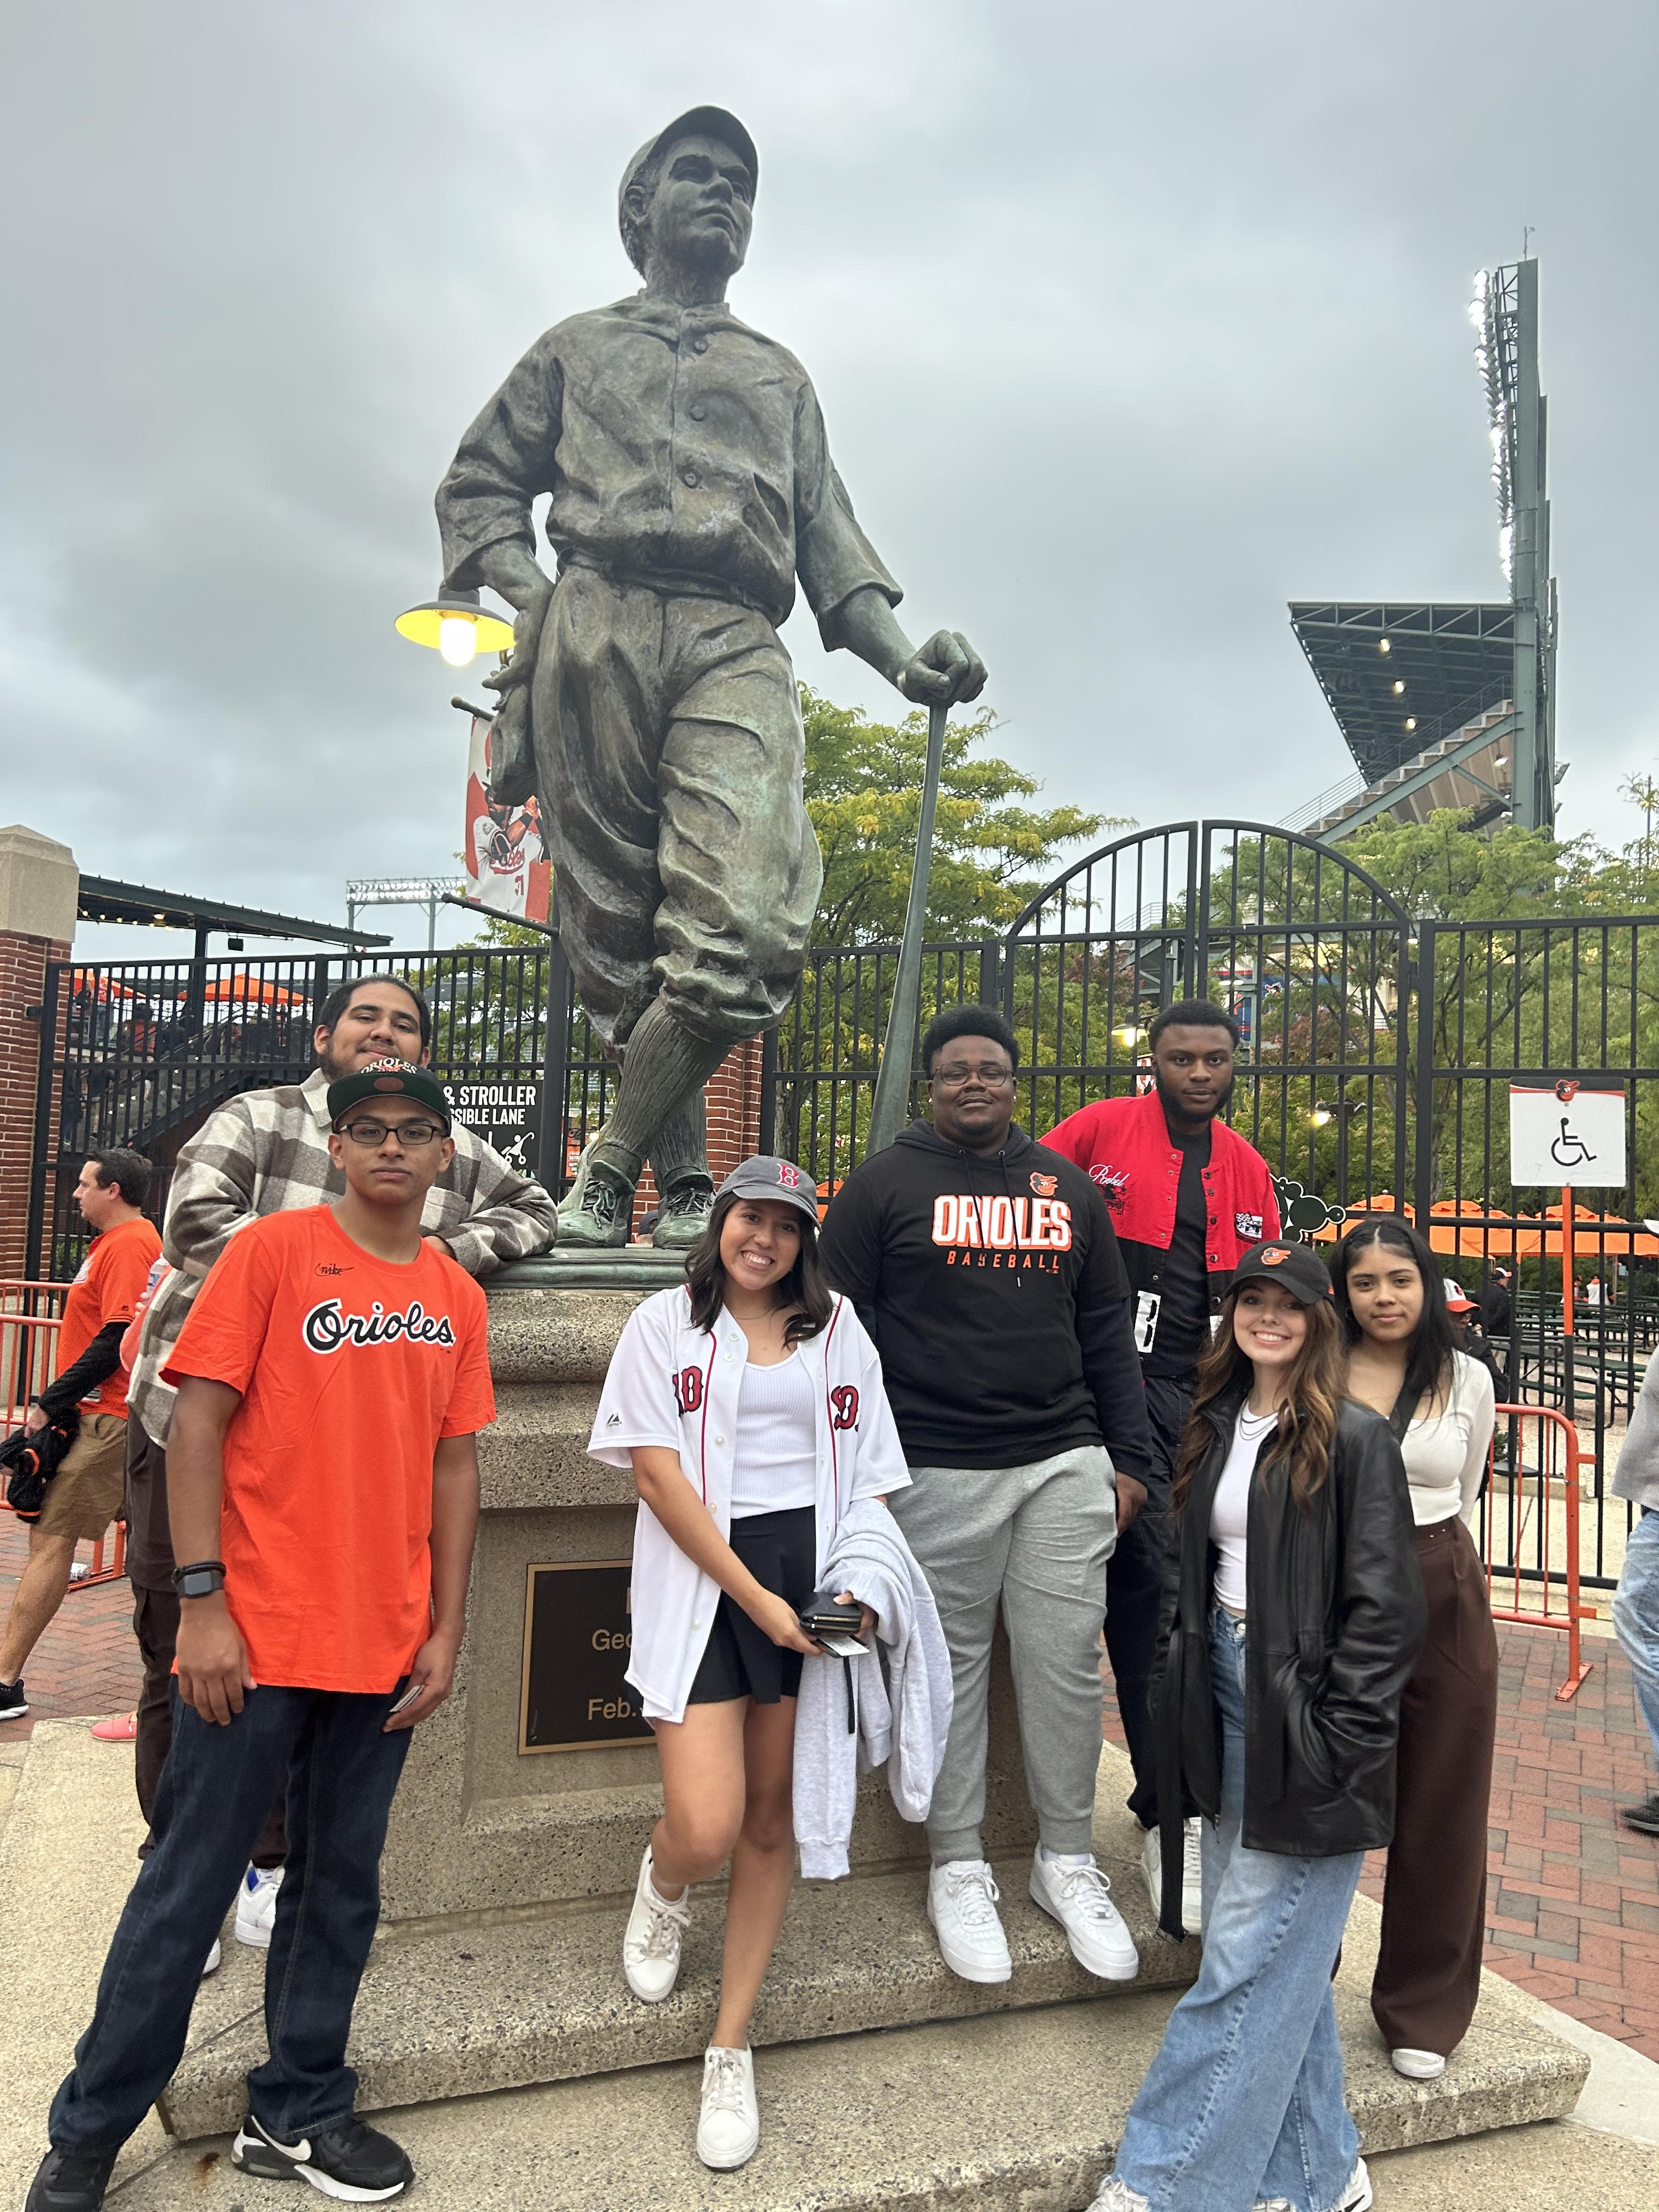 Students dressed up in Orioles clothing for a baseball game